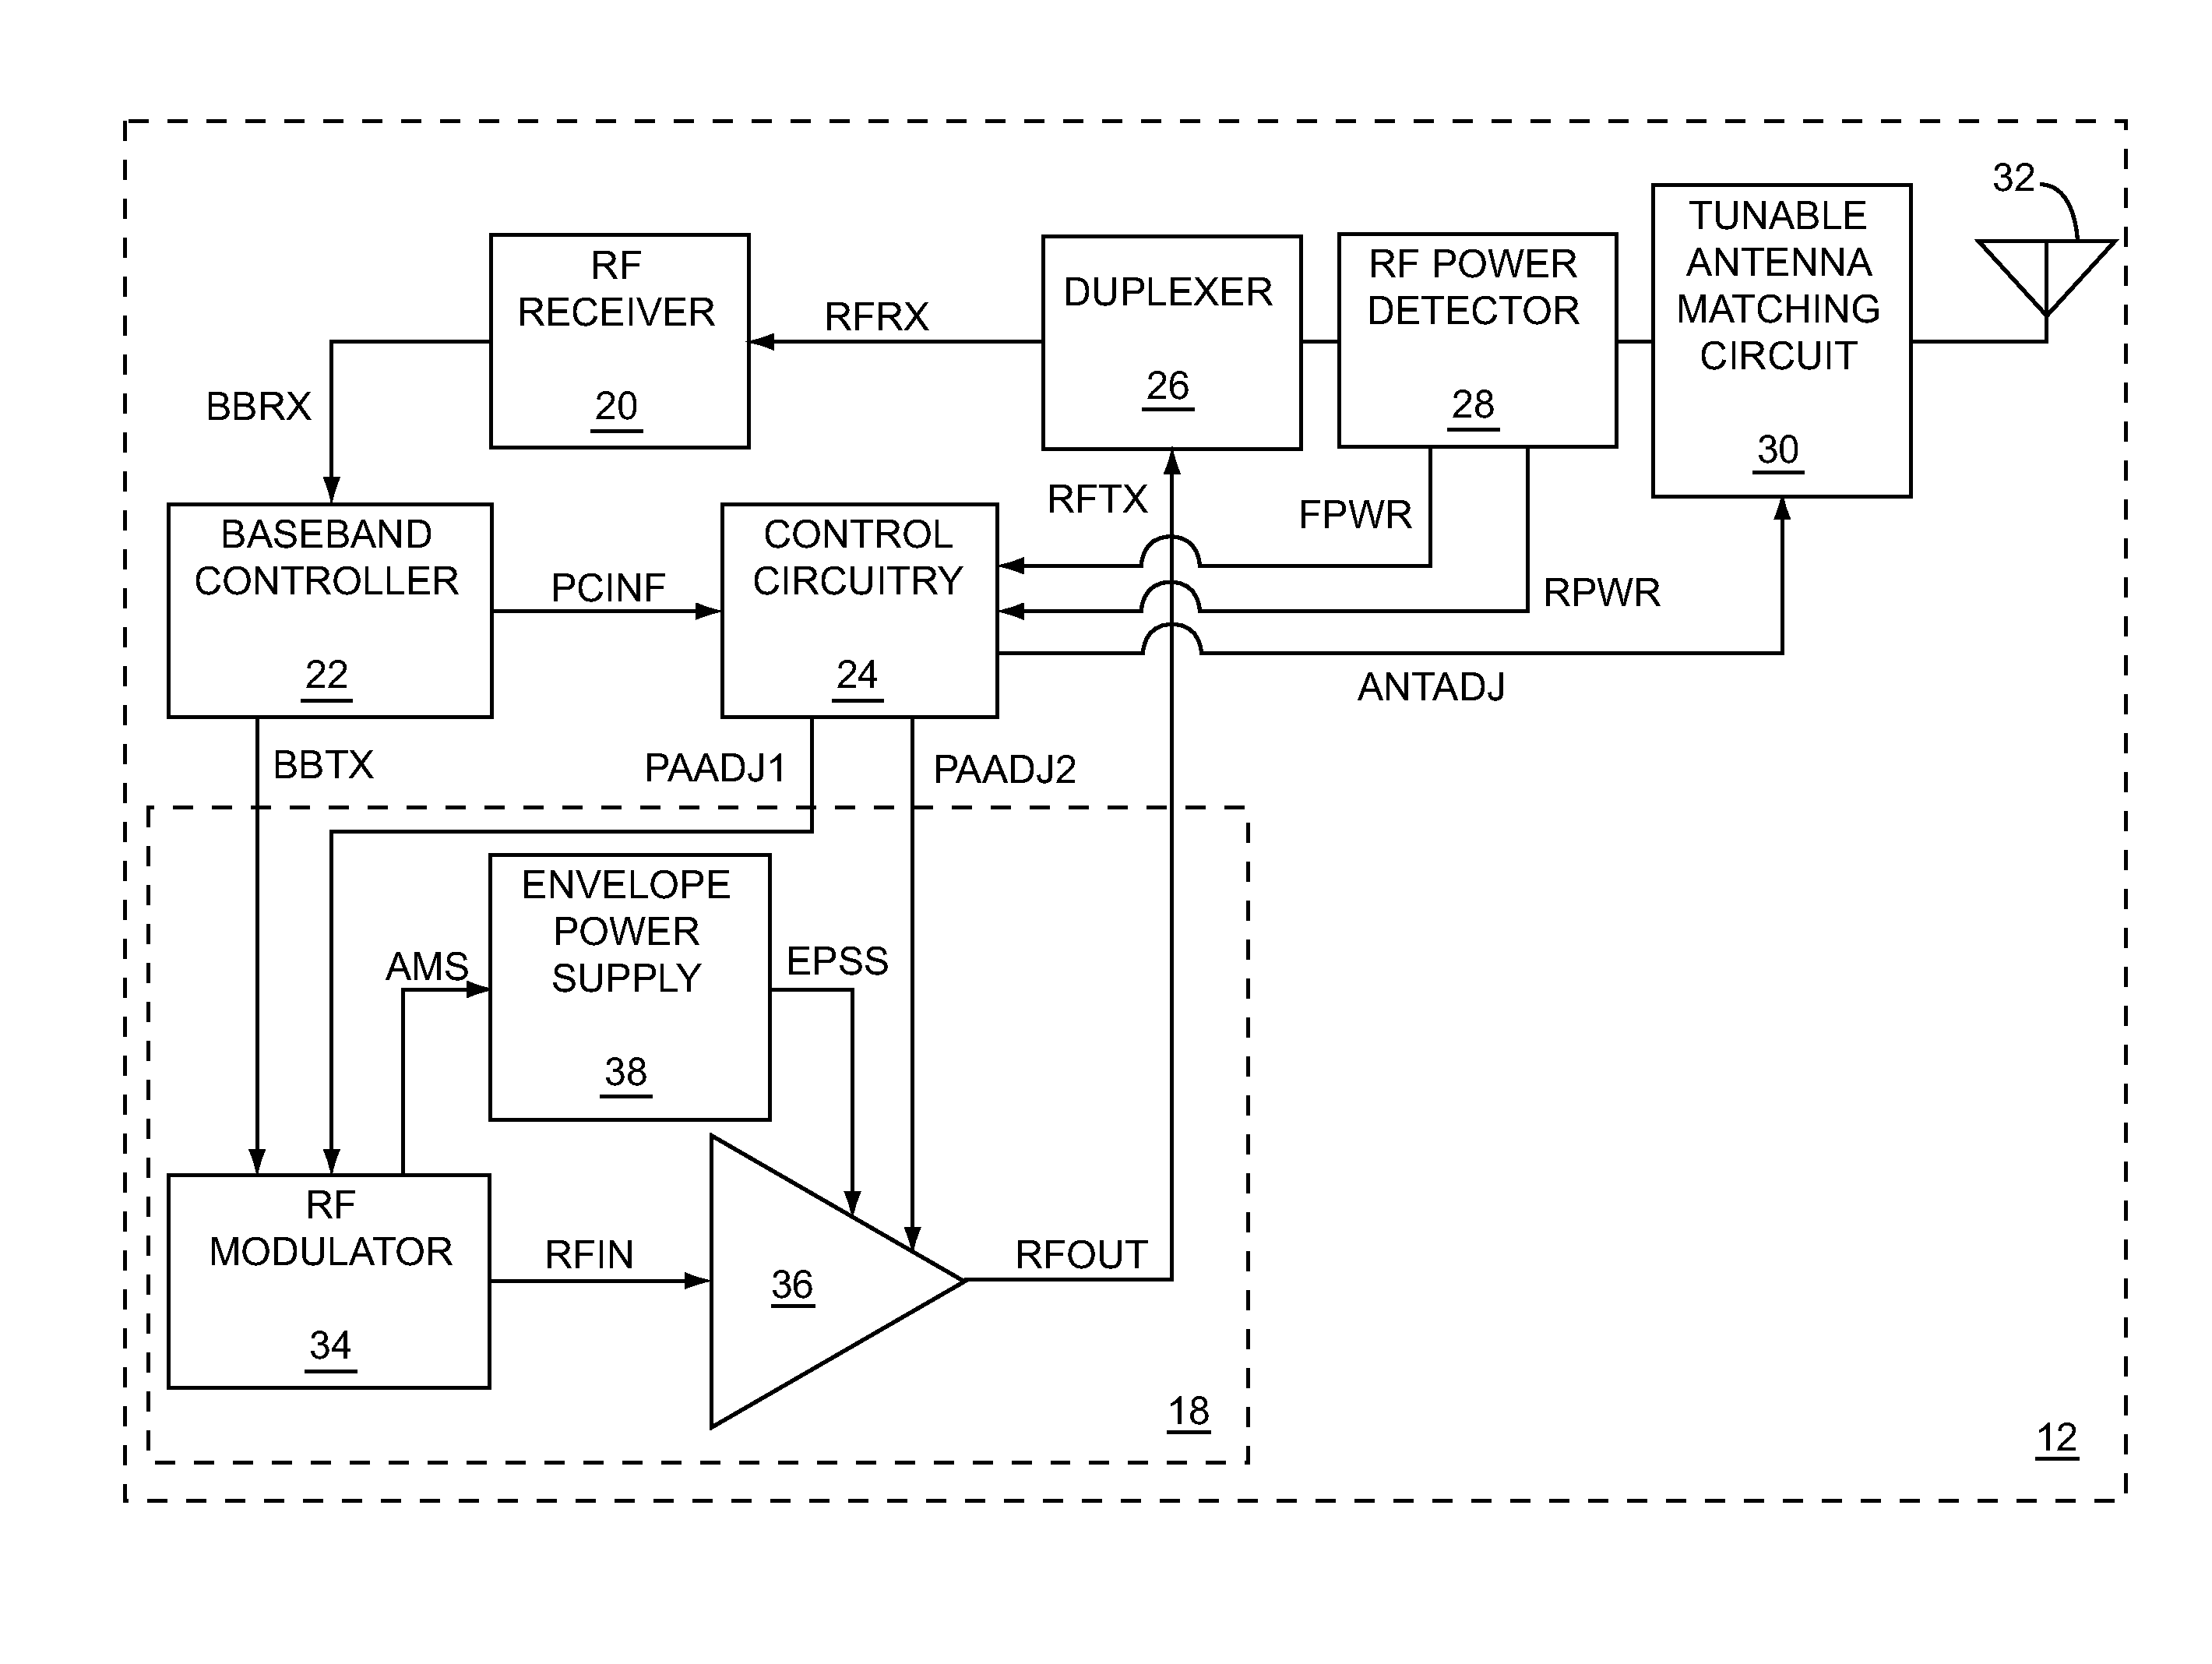 Power control loop using a tunable antenna matching circuit